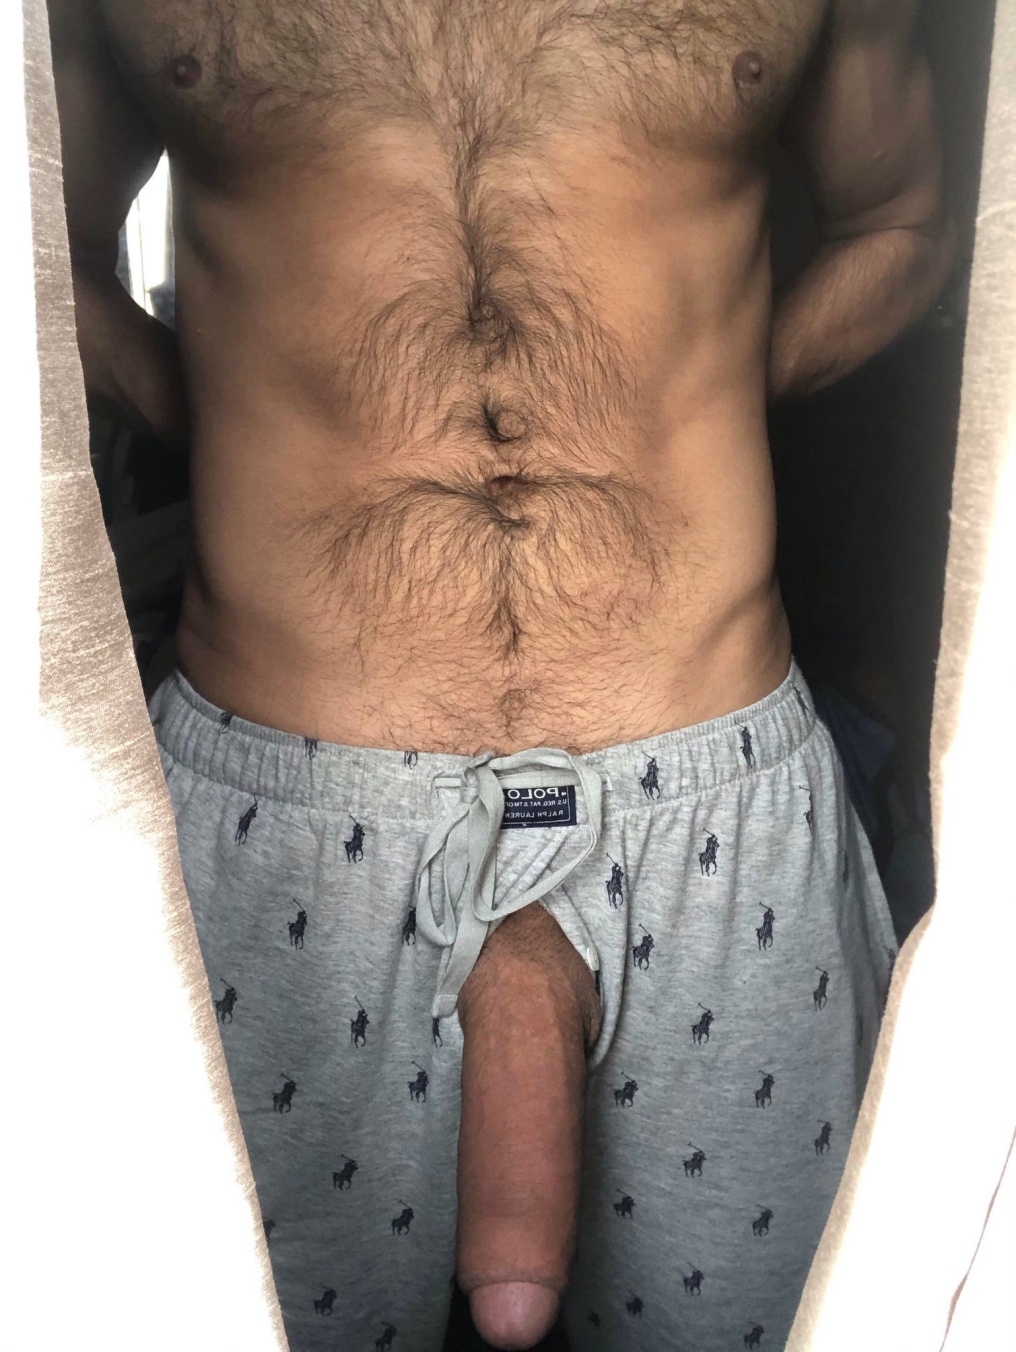 Big Fat Hairy Dick - Hairy guy with a big cock - Penis Pictures